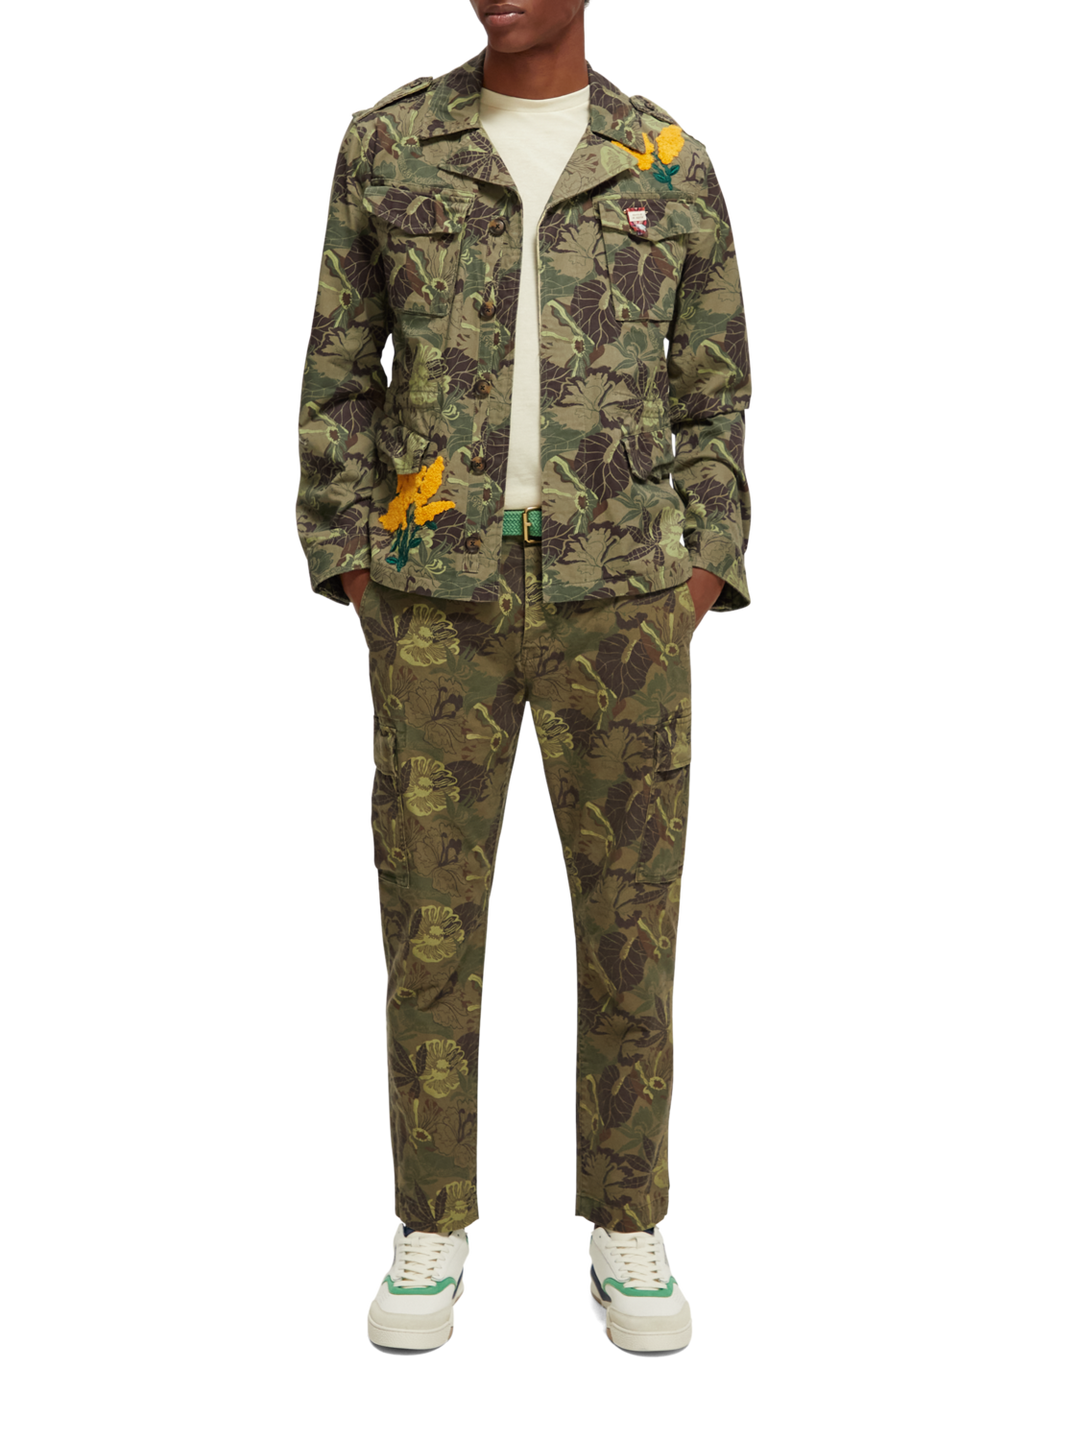 Printed Field Jacket in Army Flower Print | Buster McGee Daylesford